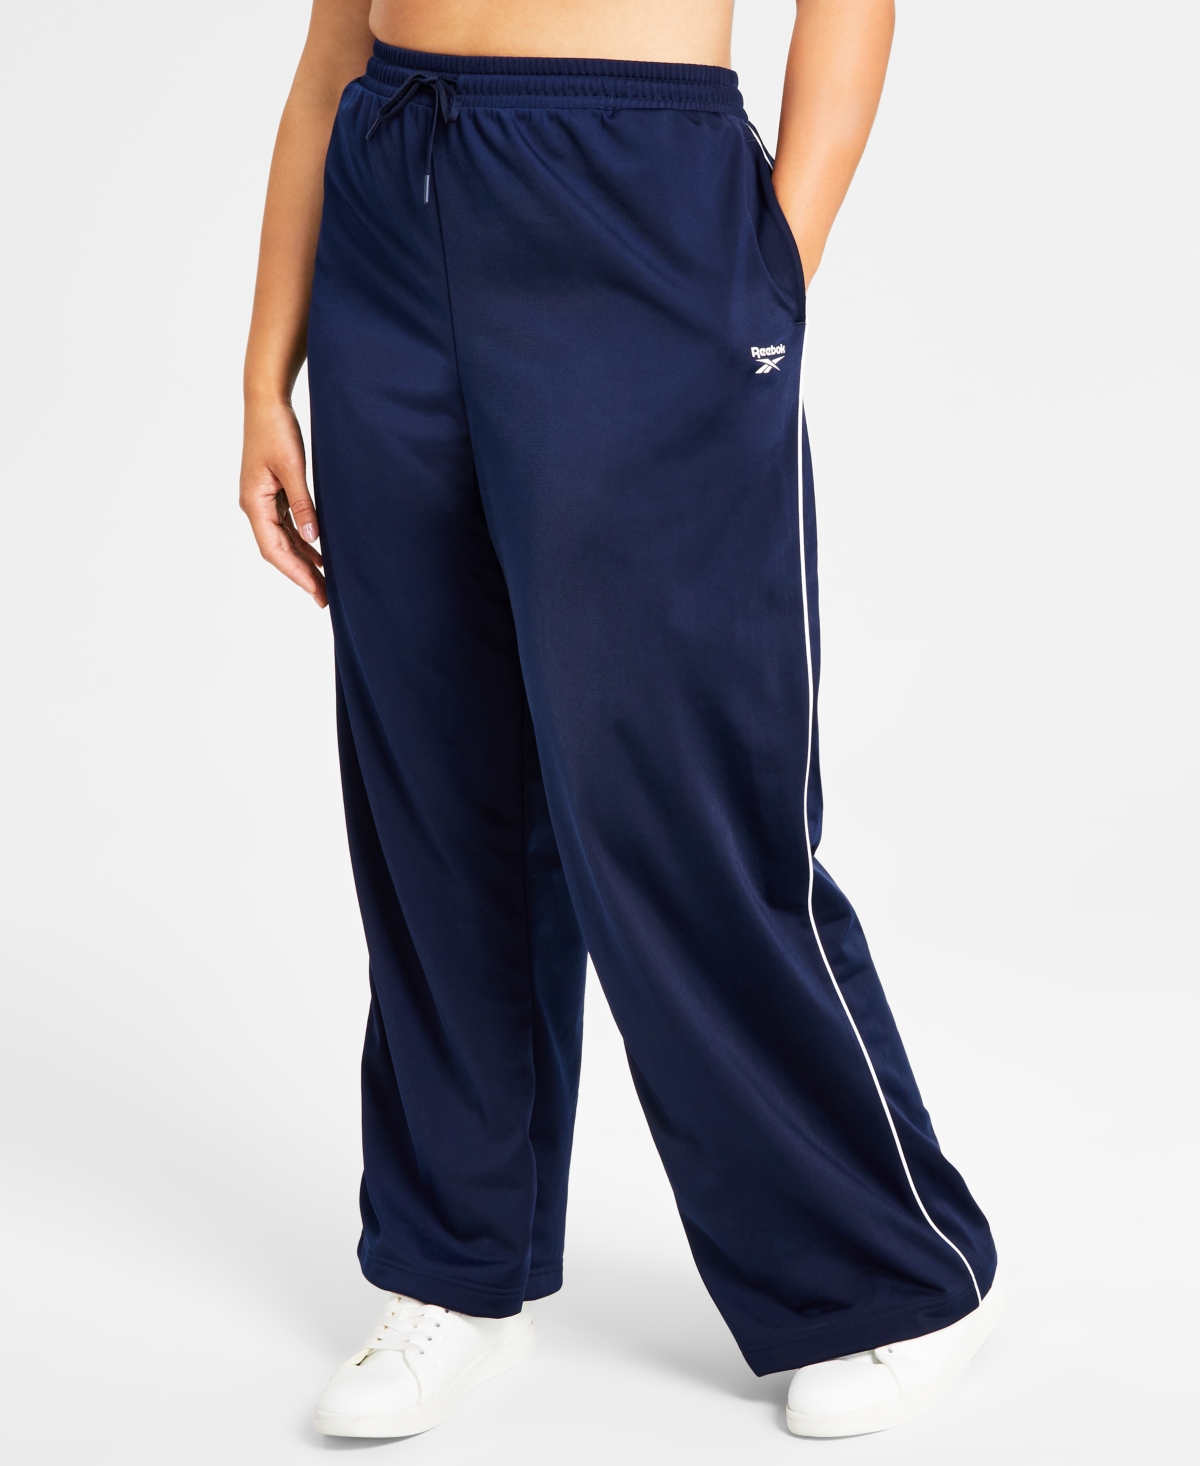 Shop Reebok Women's Pull-on Drawstring Tricot Pants, A Macy's Exclusive In Vector Navy